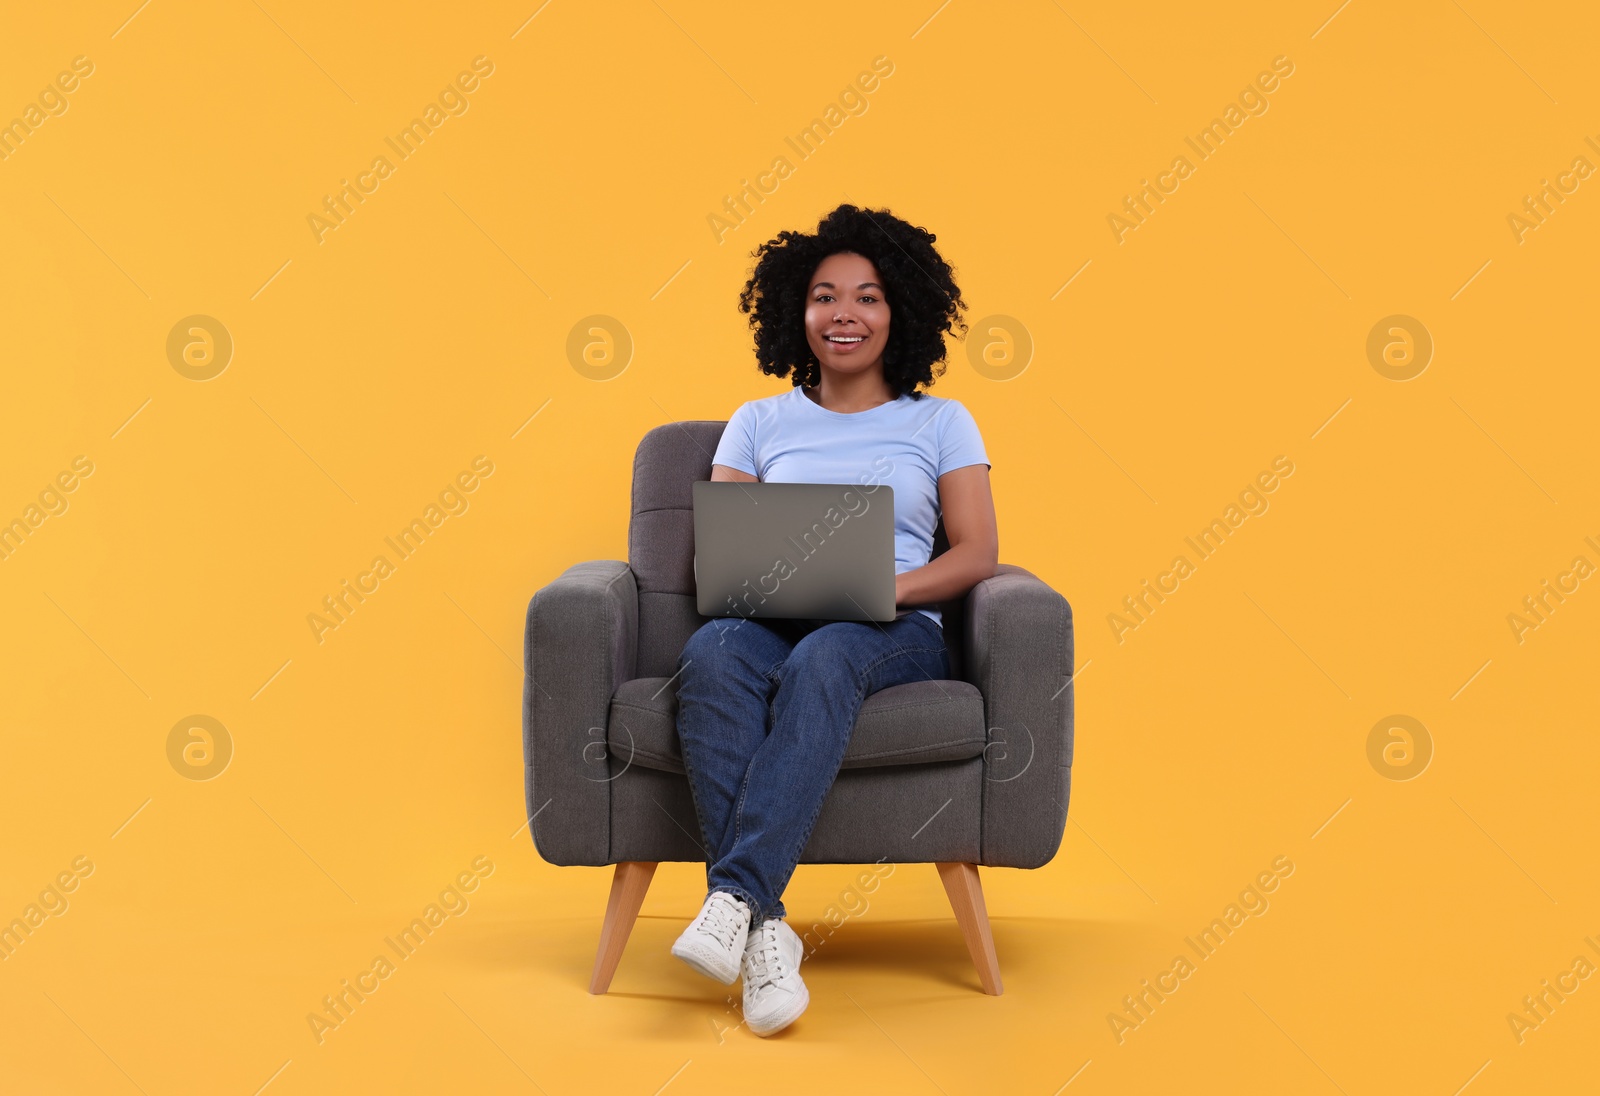 Photo of Happy young woman with laptop sitting in armchair against yellow background